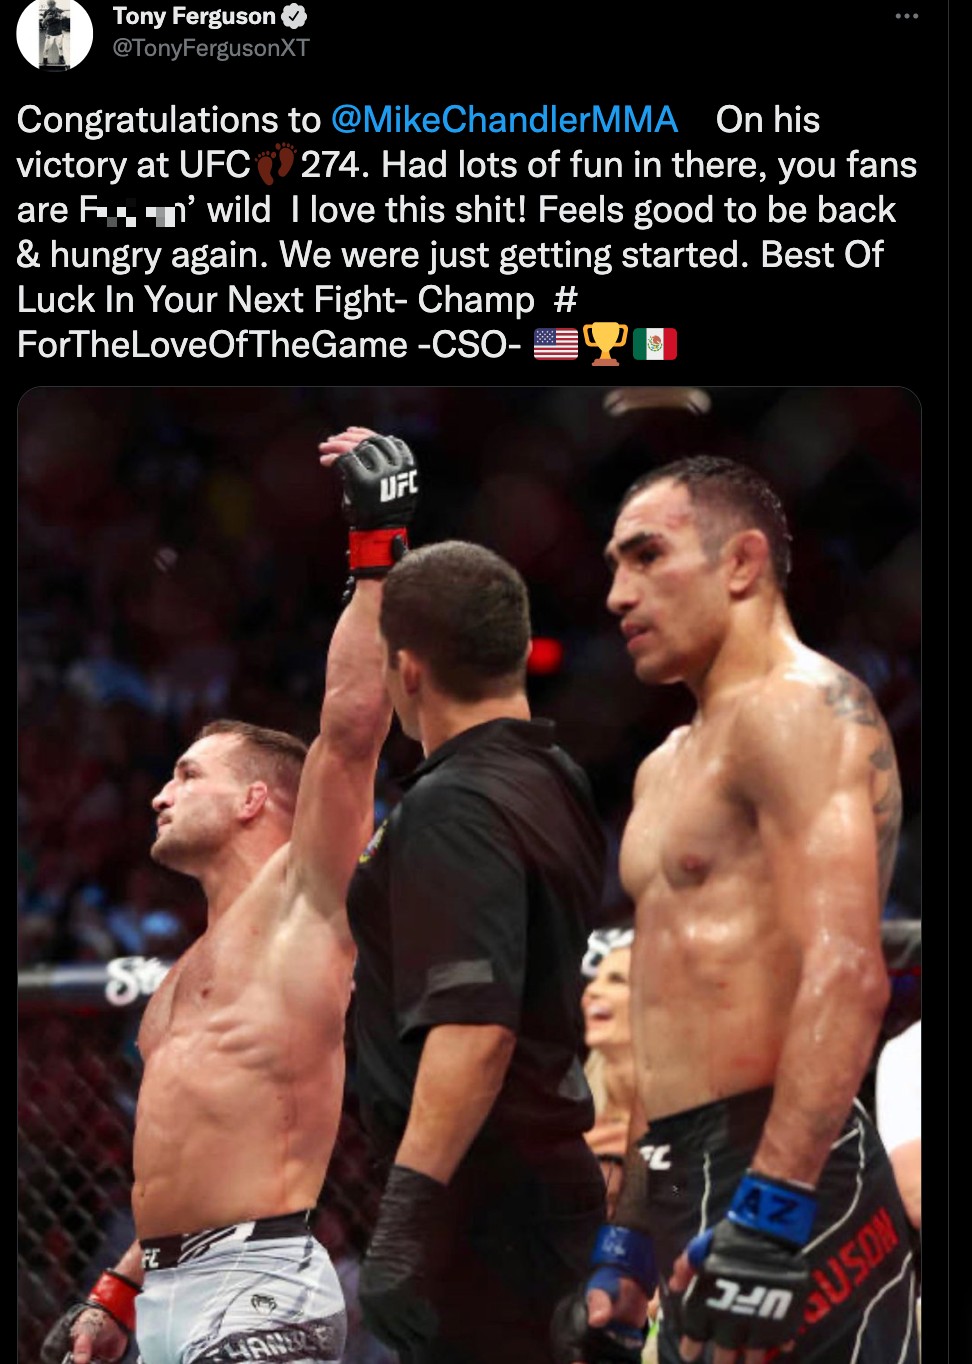 Tony Ferguson breaks his silence after being released from the hospital following a terrible KO loss to Michael Chandler in UFC 274